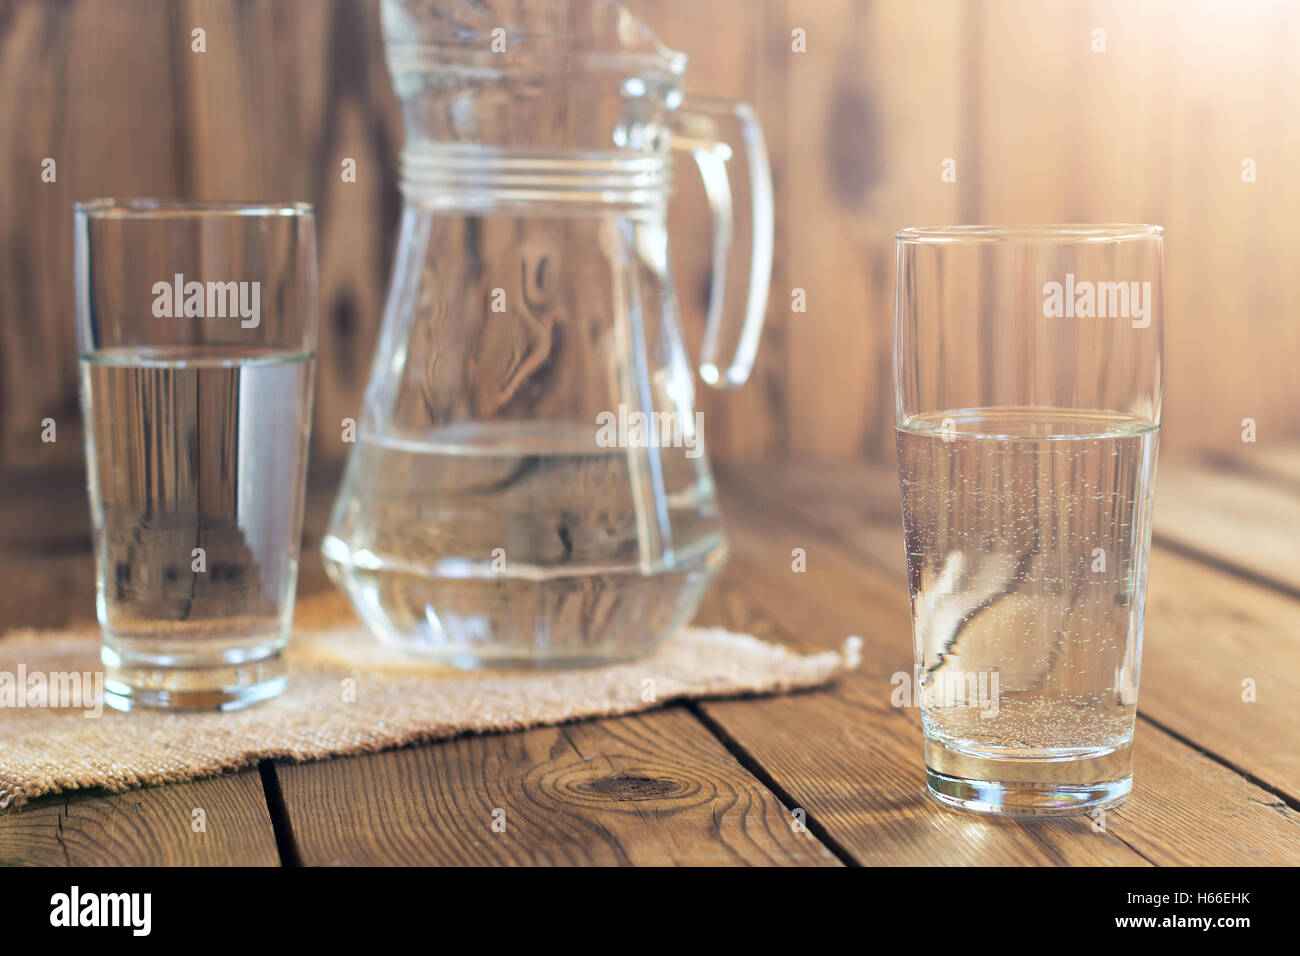 Glasses of water on a wooden table. Selective focus. Shallow DOF. With lighting effects. Stock Photo